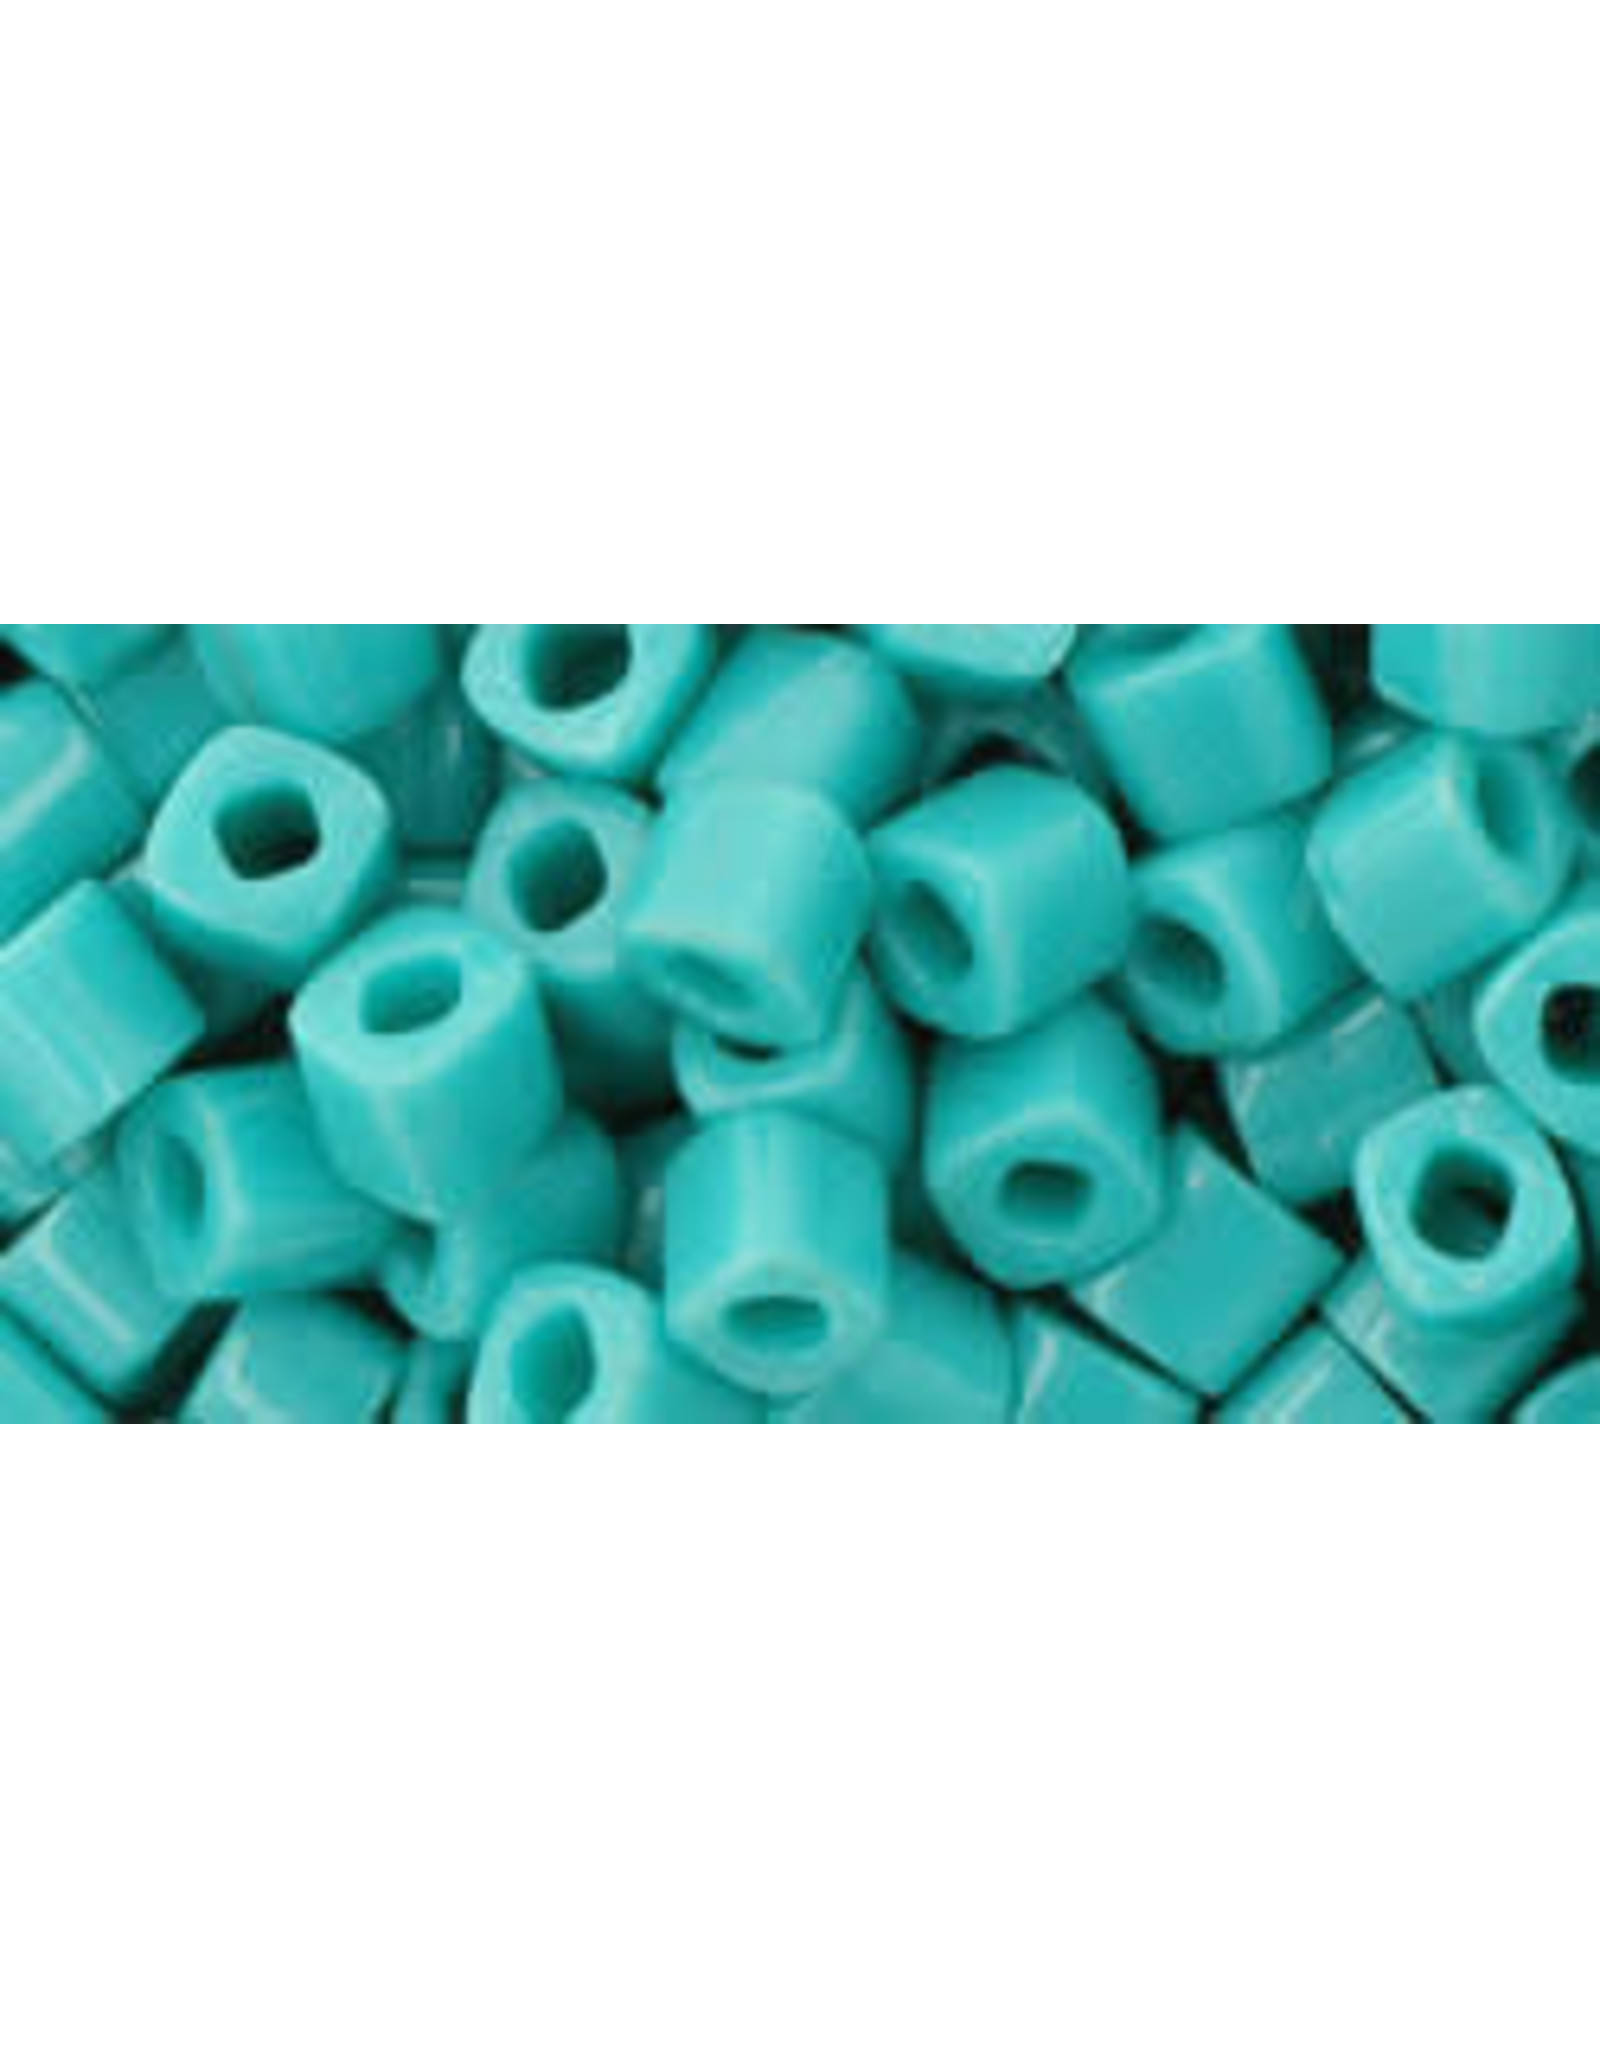 Toho 55  4mm  Cube  6g  Opaque Turquoise Blue